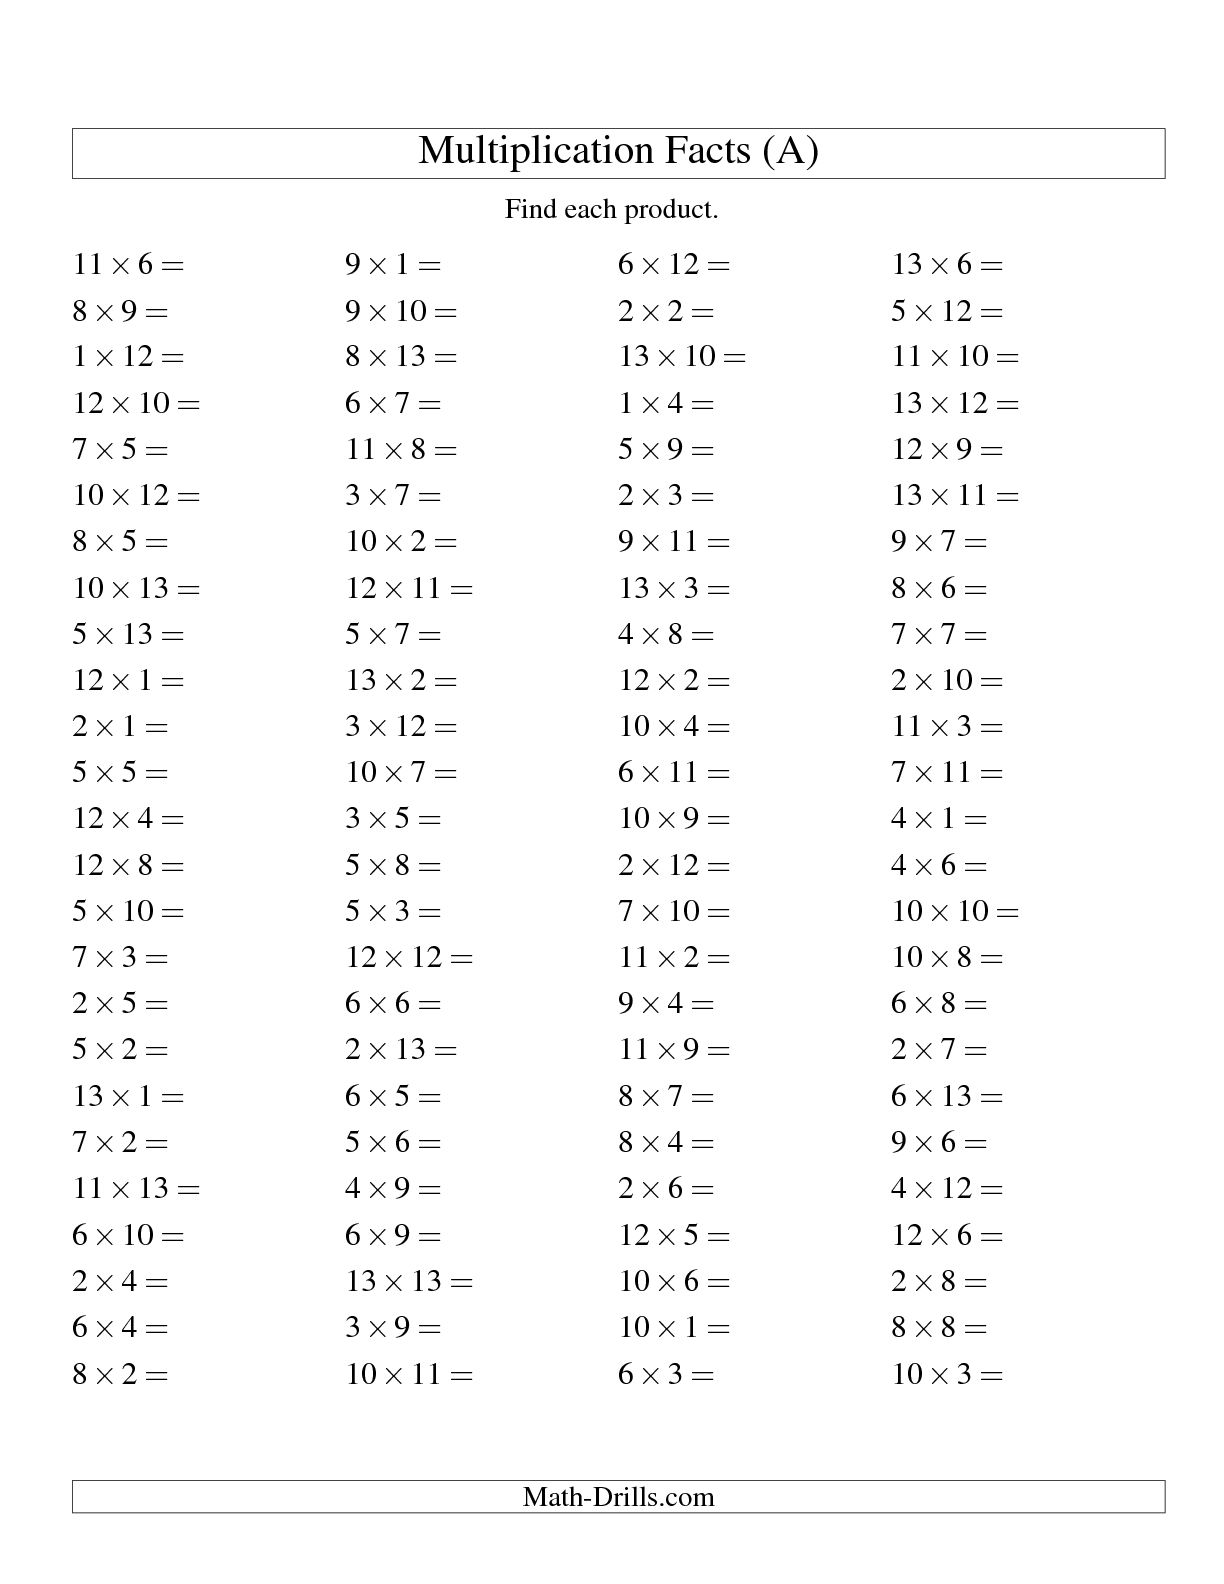 100 Addition Facts Pdf - subtraction facts worksheets pdf teaching